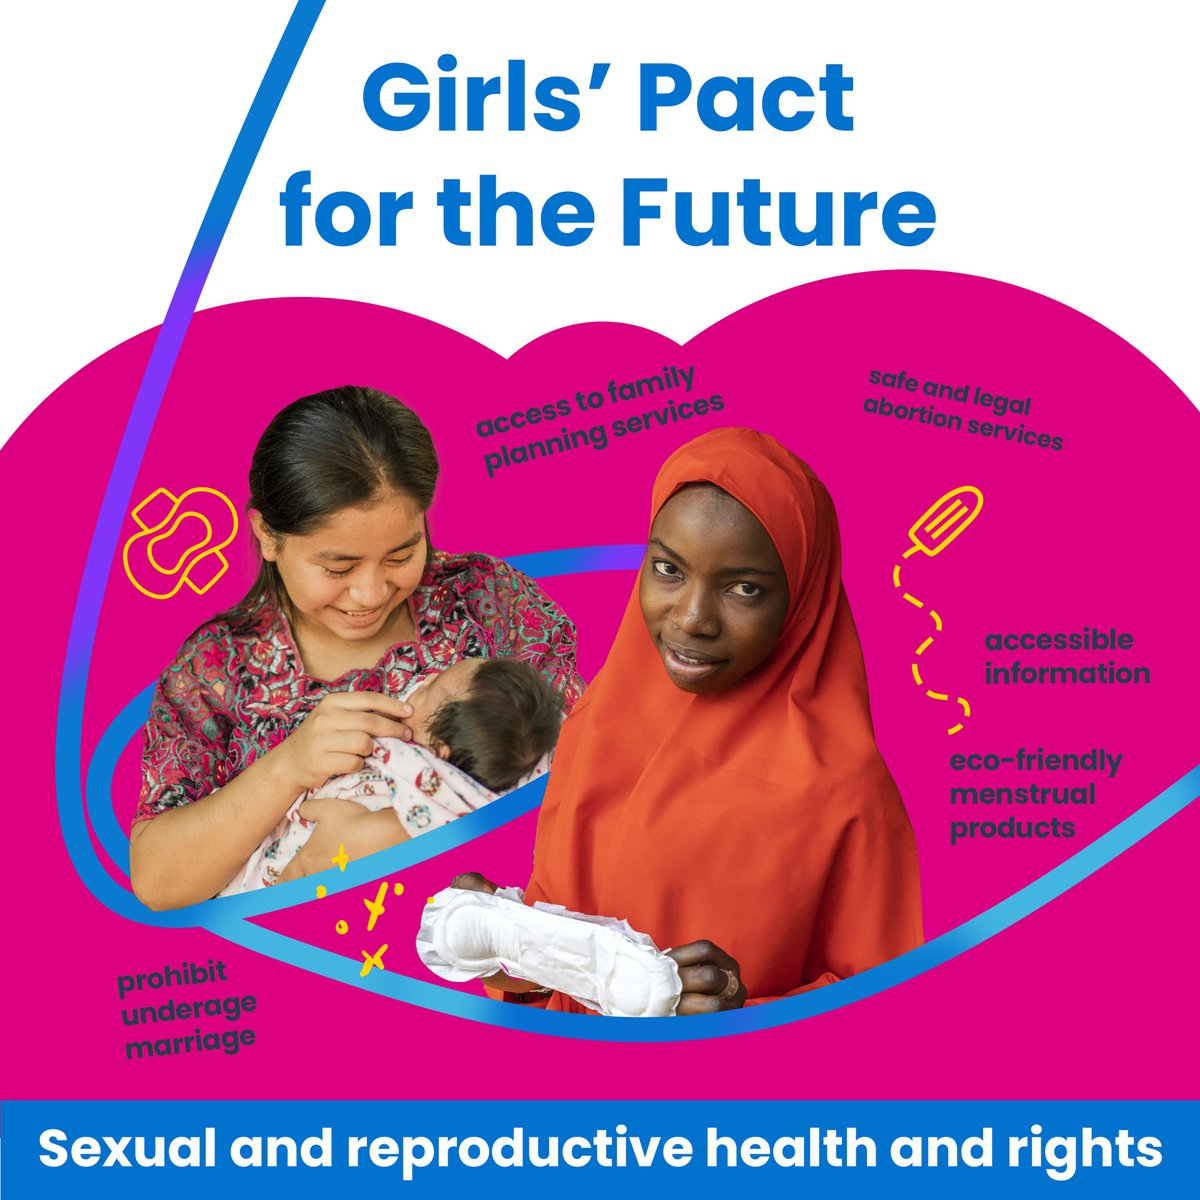 The #FutureGirlsWant is one where all young people have access to youth-friendly sexual and reproductive health services. In the Girls’ Pact for the Future, they’re calling on global leaders to remove barriers such as cost, stigma, and lack of information